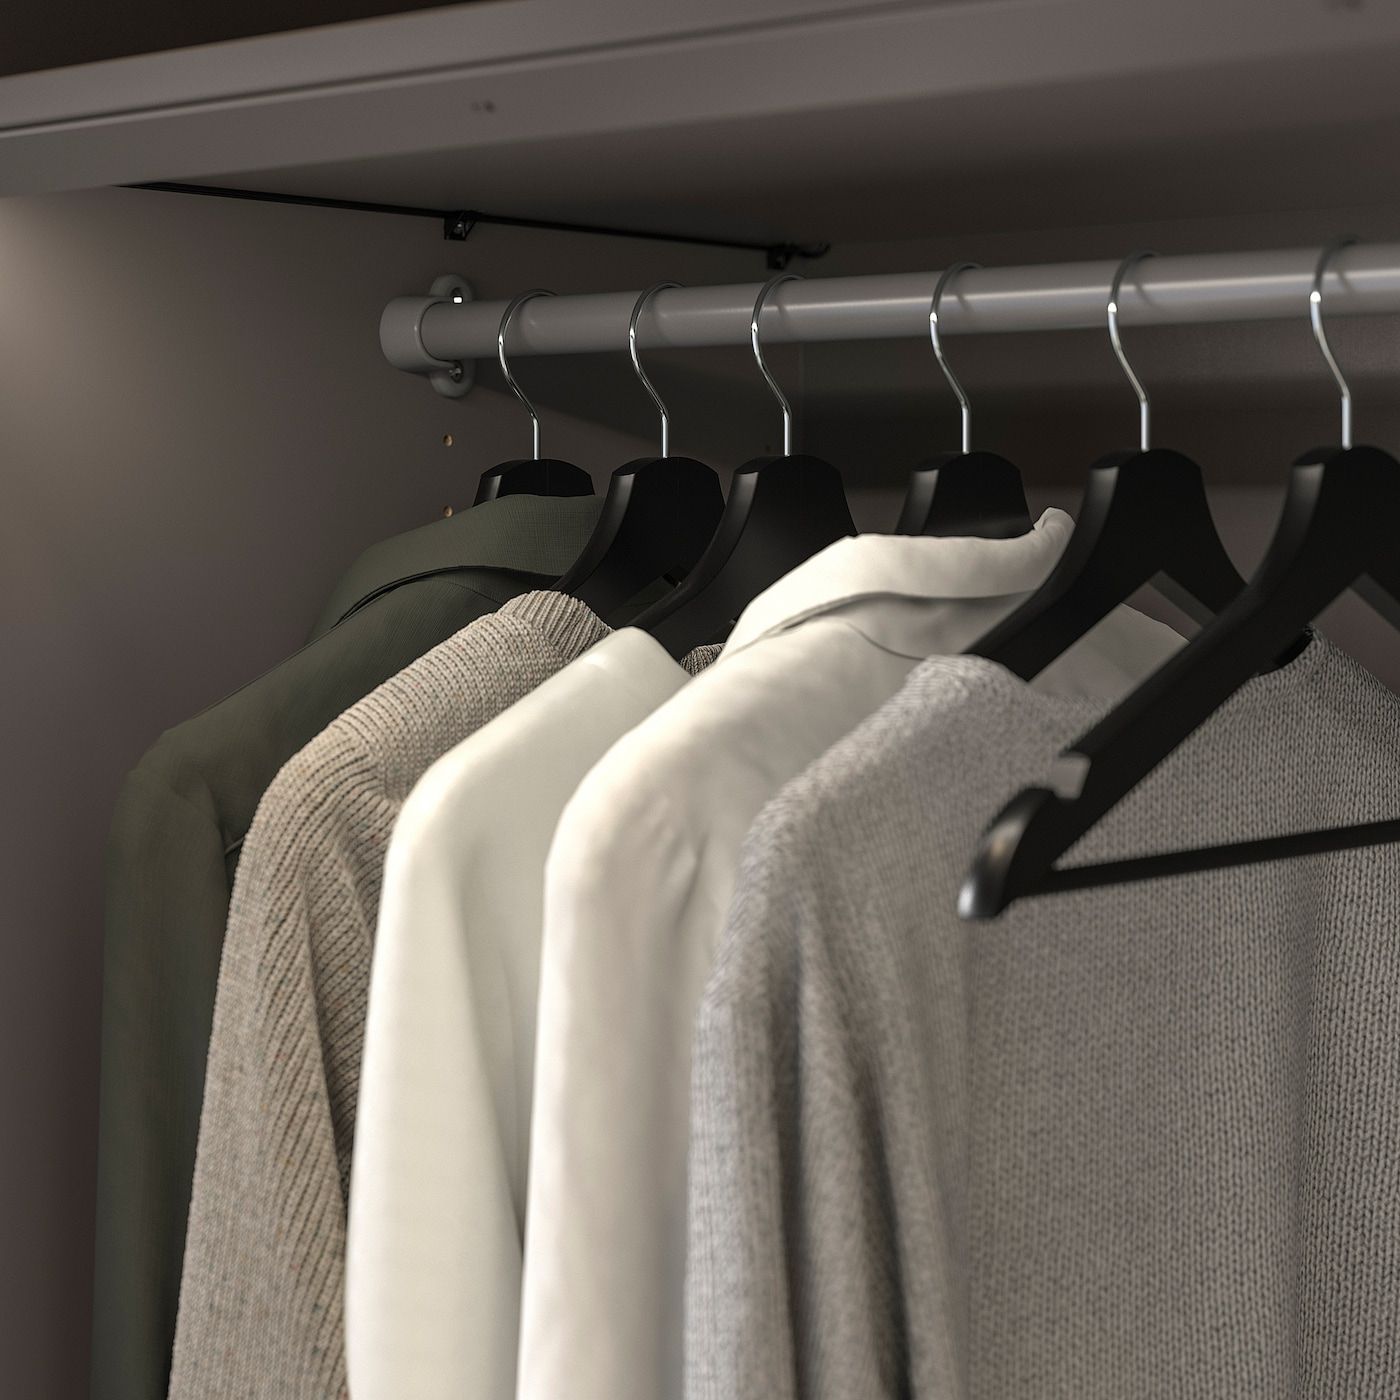 Komplement Clothes Rail, Dark Grey, 100 Cm – Ikea With Regard To Wardrobes With Hanging Rod (View 13 of 15)